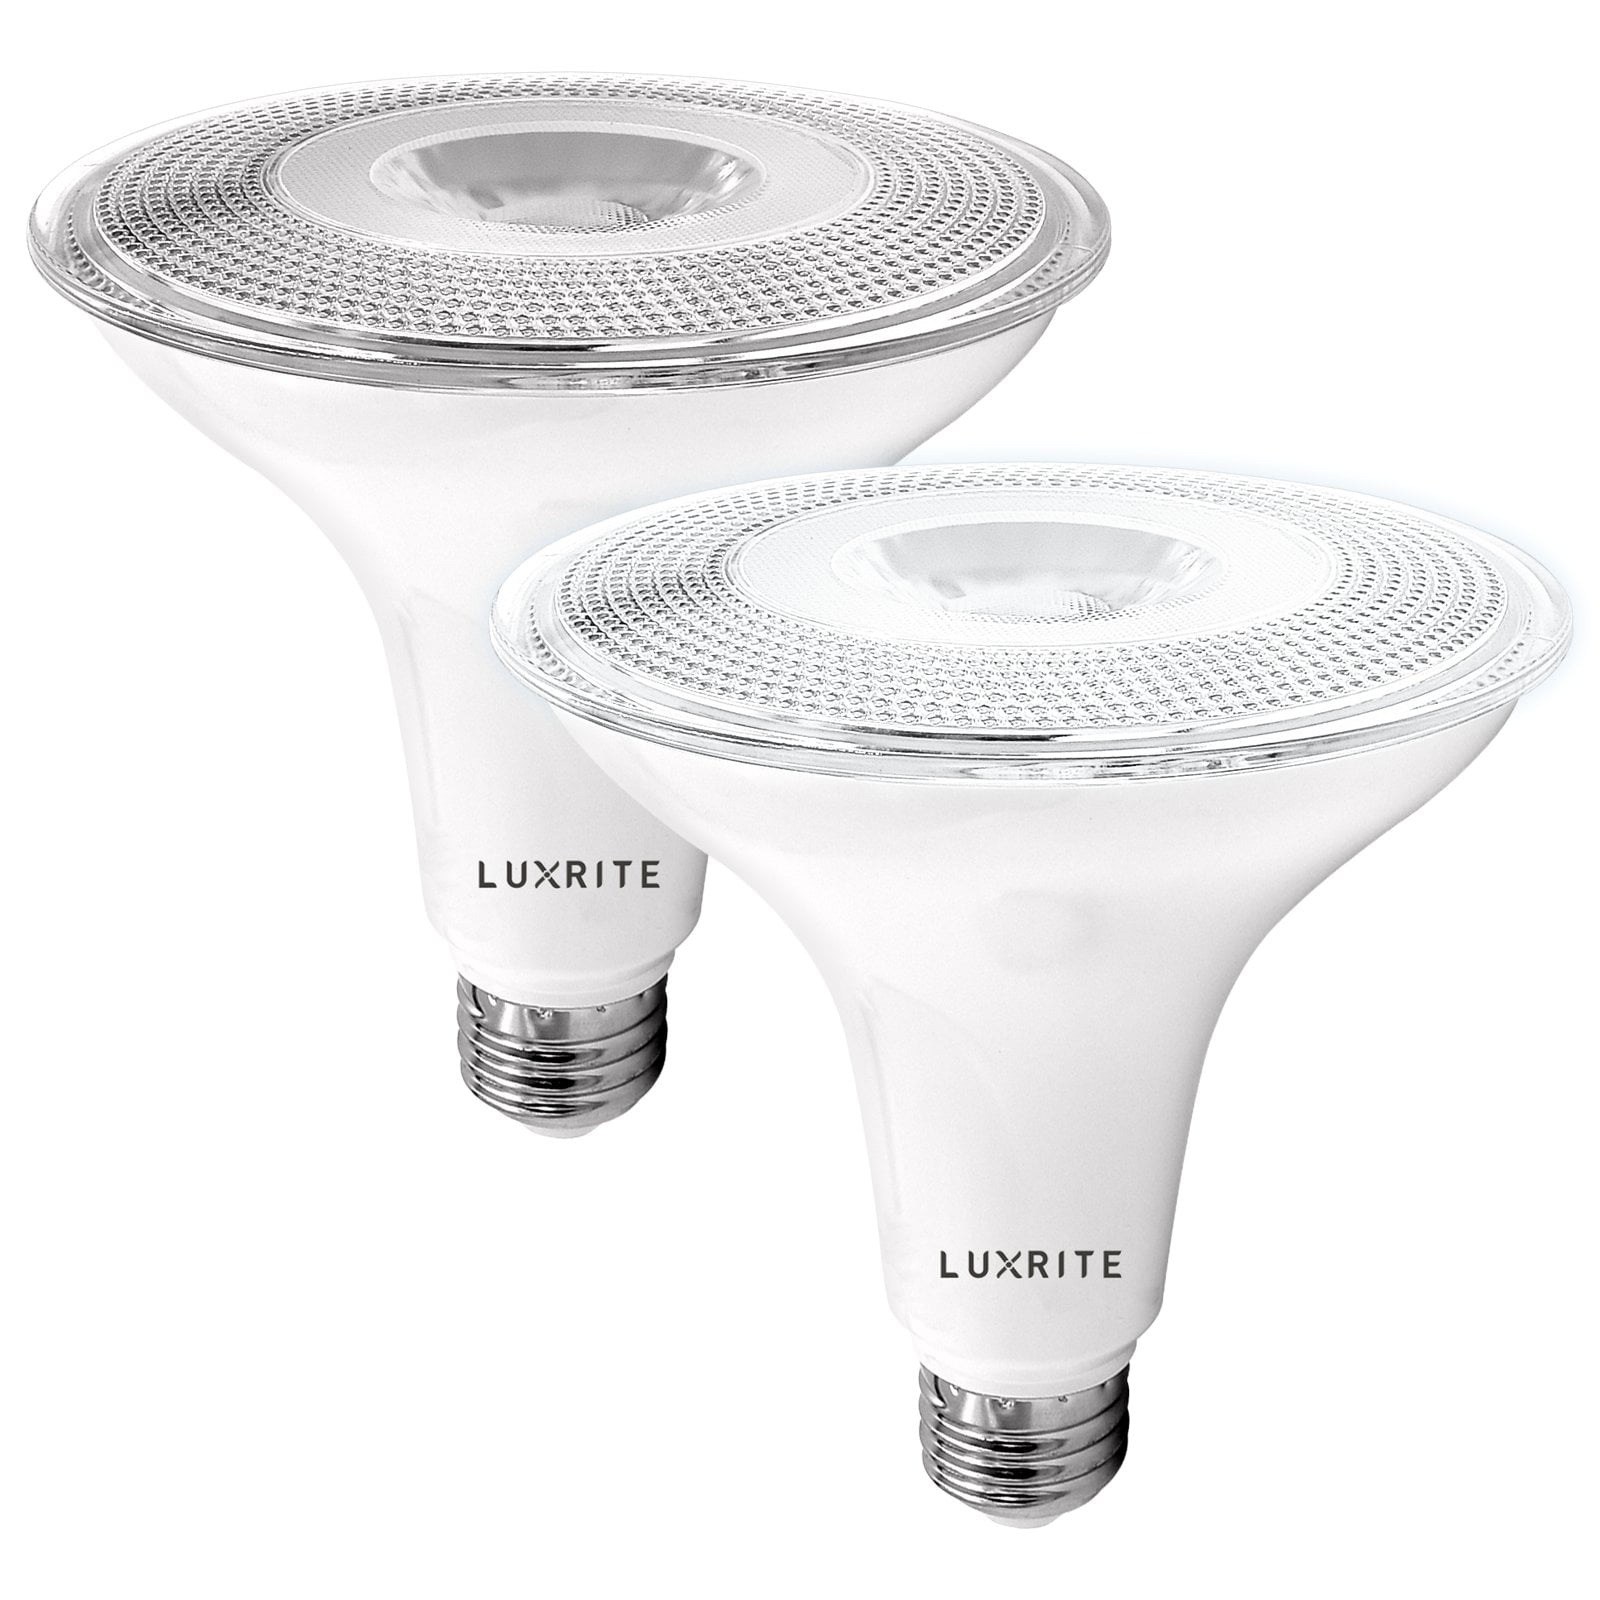 Luxrite Dusk to Dawn LED Bulb 5000K Bright White 1250 Lumens Wet Rated Security Spotlight UL Listed E26 2-Pack - Walmart.com